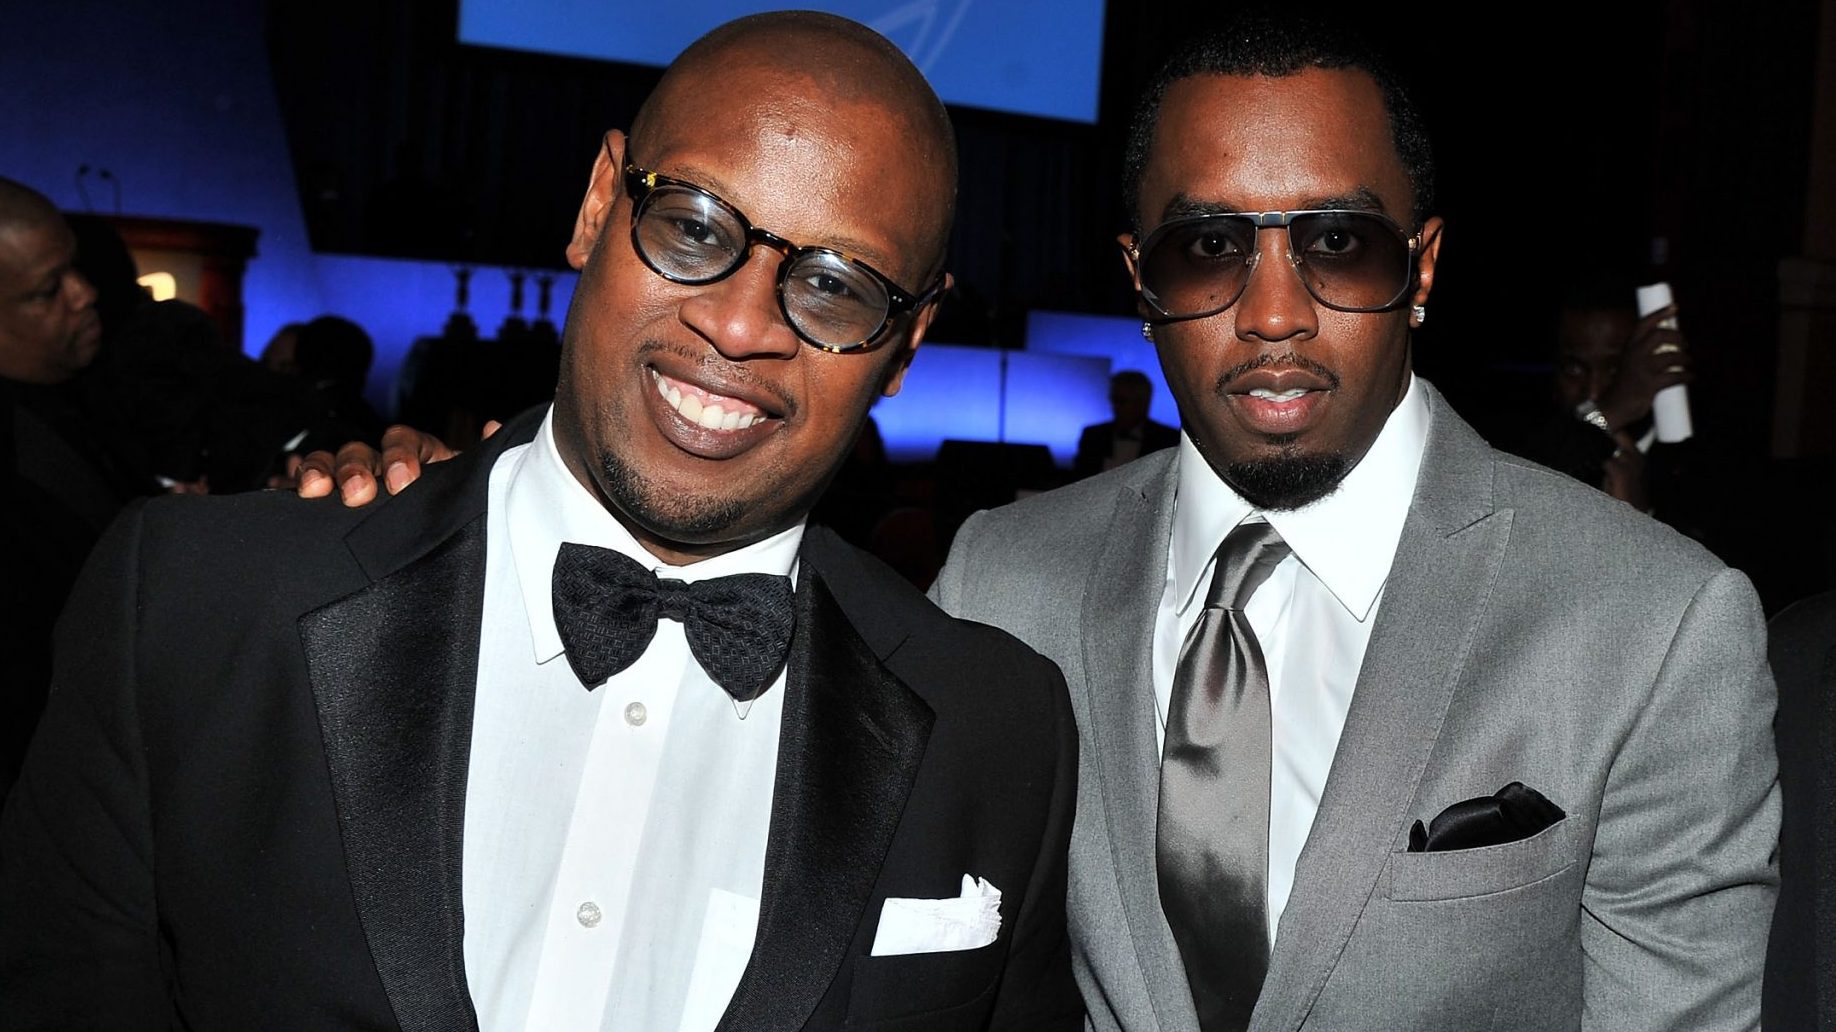 Sean Combs Gives and Gave Flowers to Andre Harrell [VIDEO]